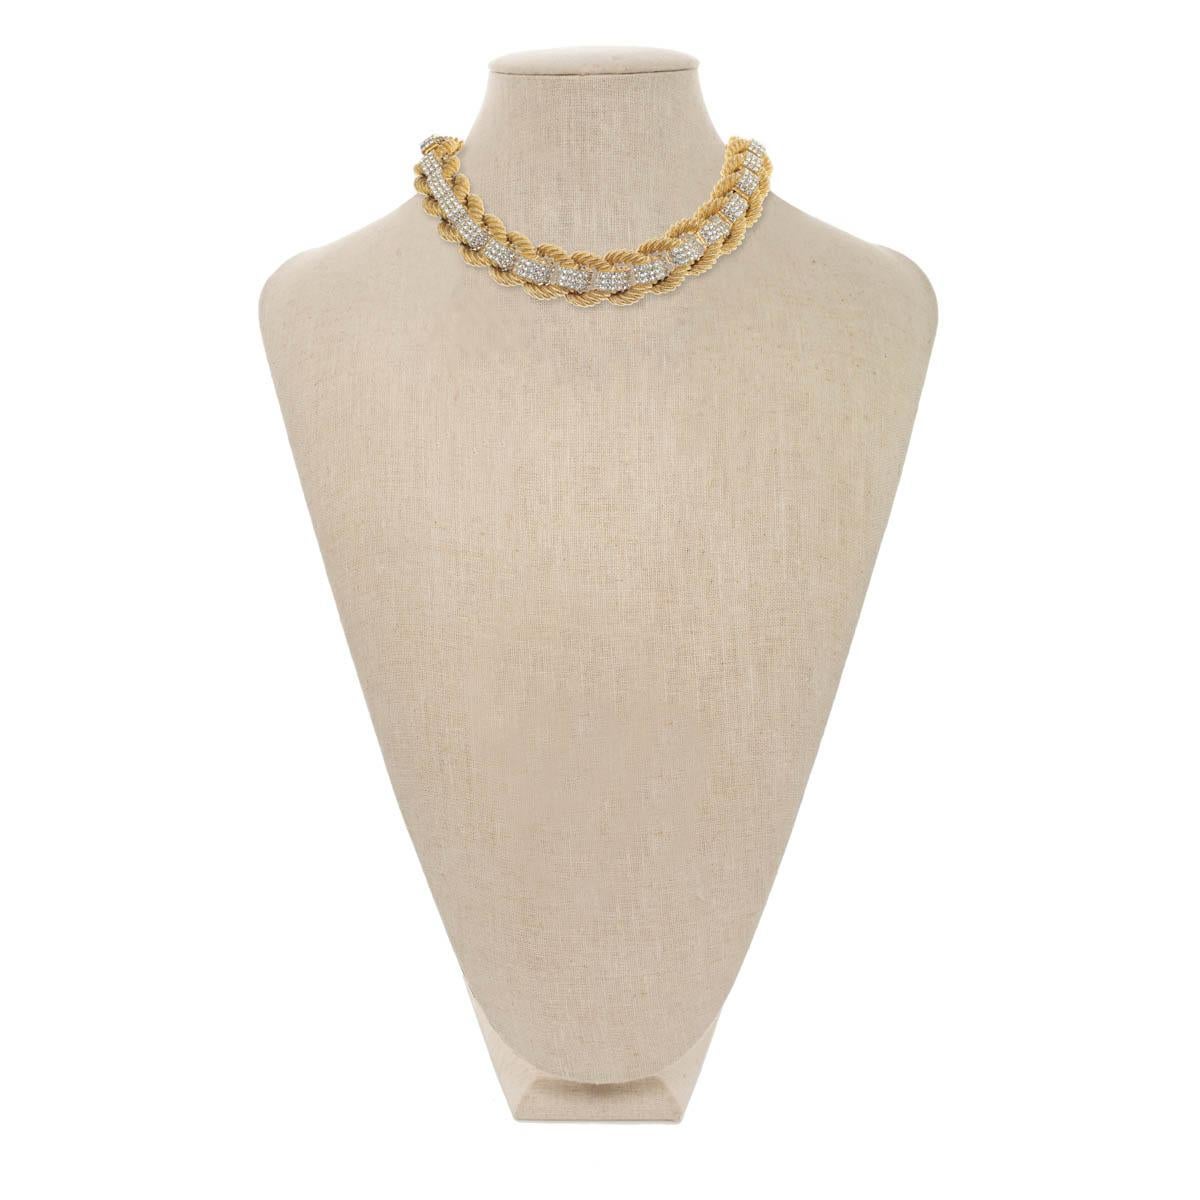 With gorgeous crystal rhinestone accents, this necklace is a timeless staple for every woman's wardrobe. Forever chic, this CINER necklace will last the test of time. 

PLEASE NOTE: The pieces available are not vintage and are not